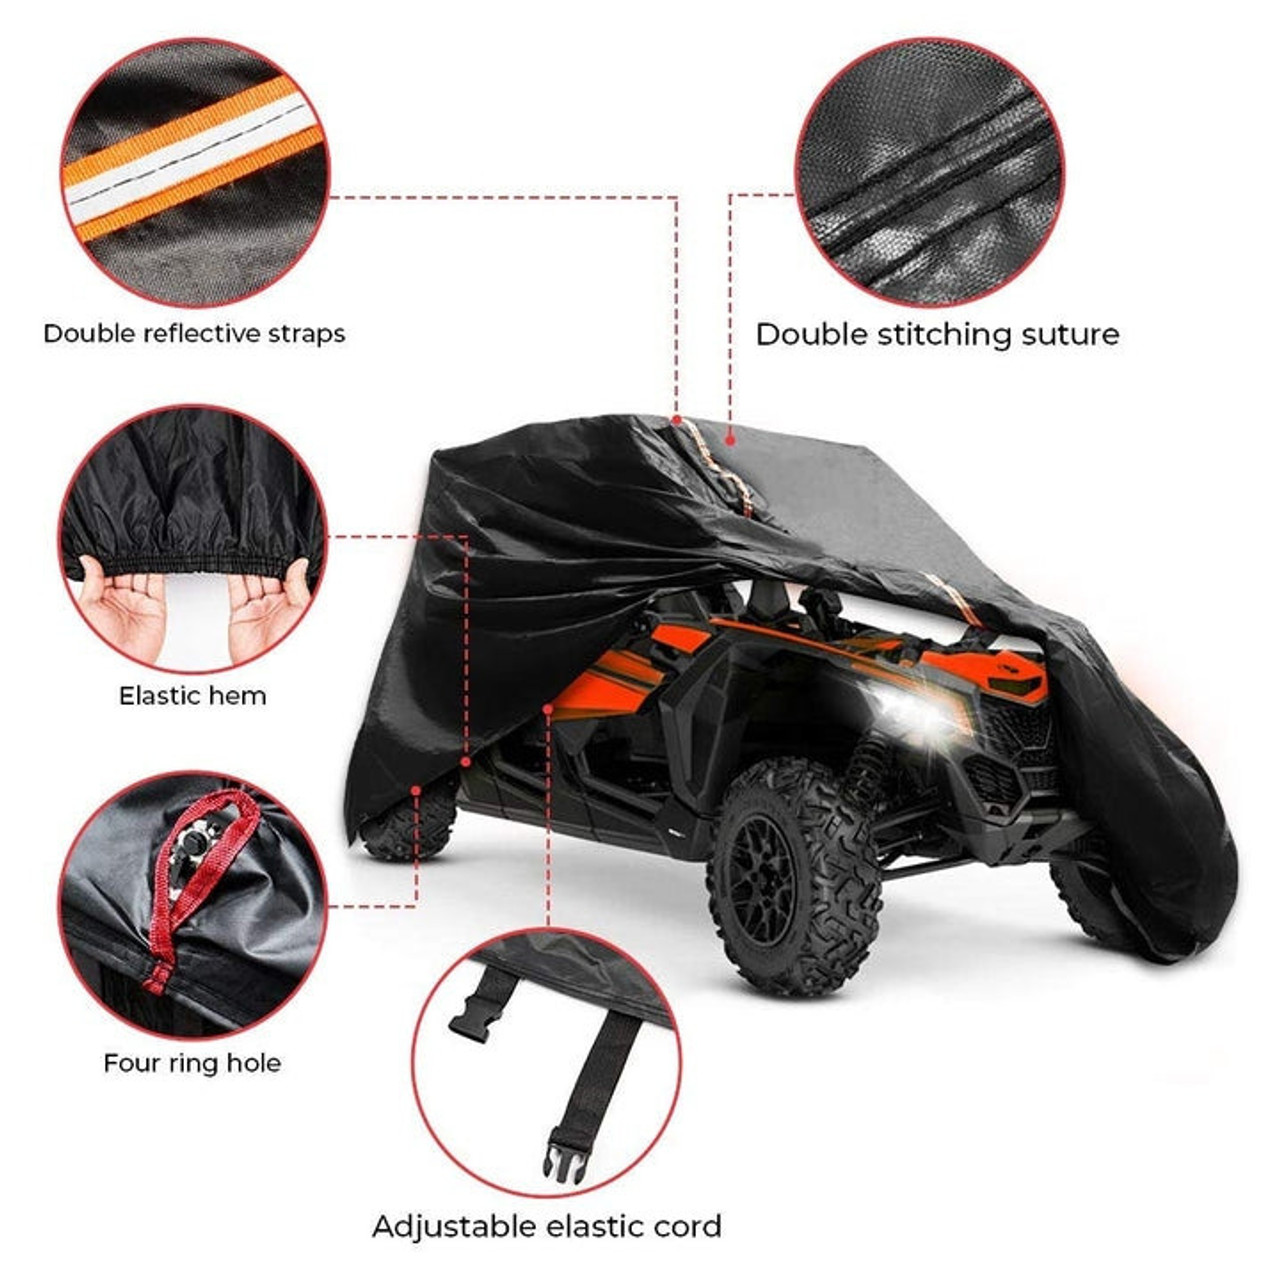 Protect Your Can-Am Maverick X3 Max UTV with Kemimoto's Premium Cover